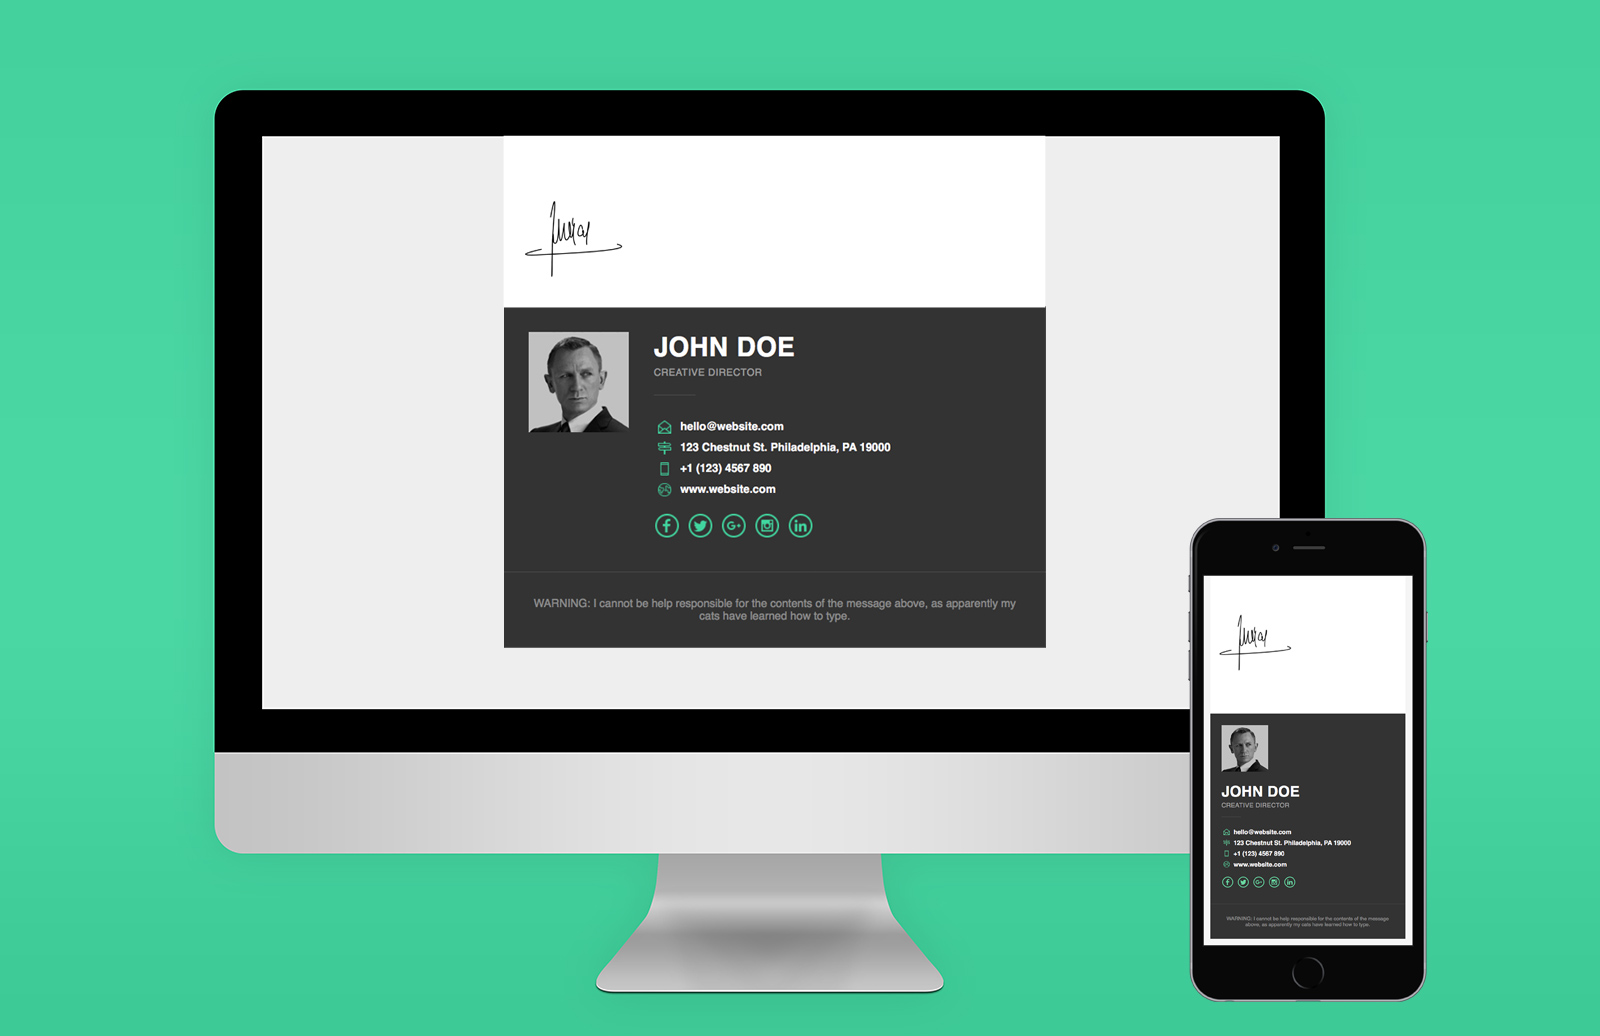 Download Responsive Email Signature Template | Medialoot